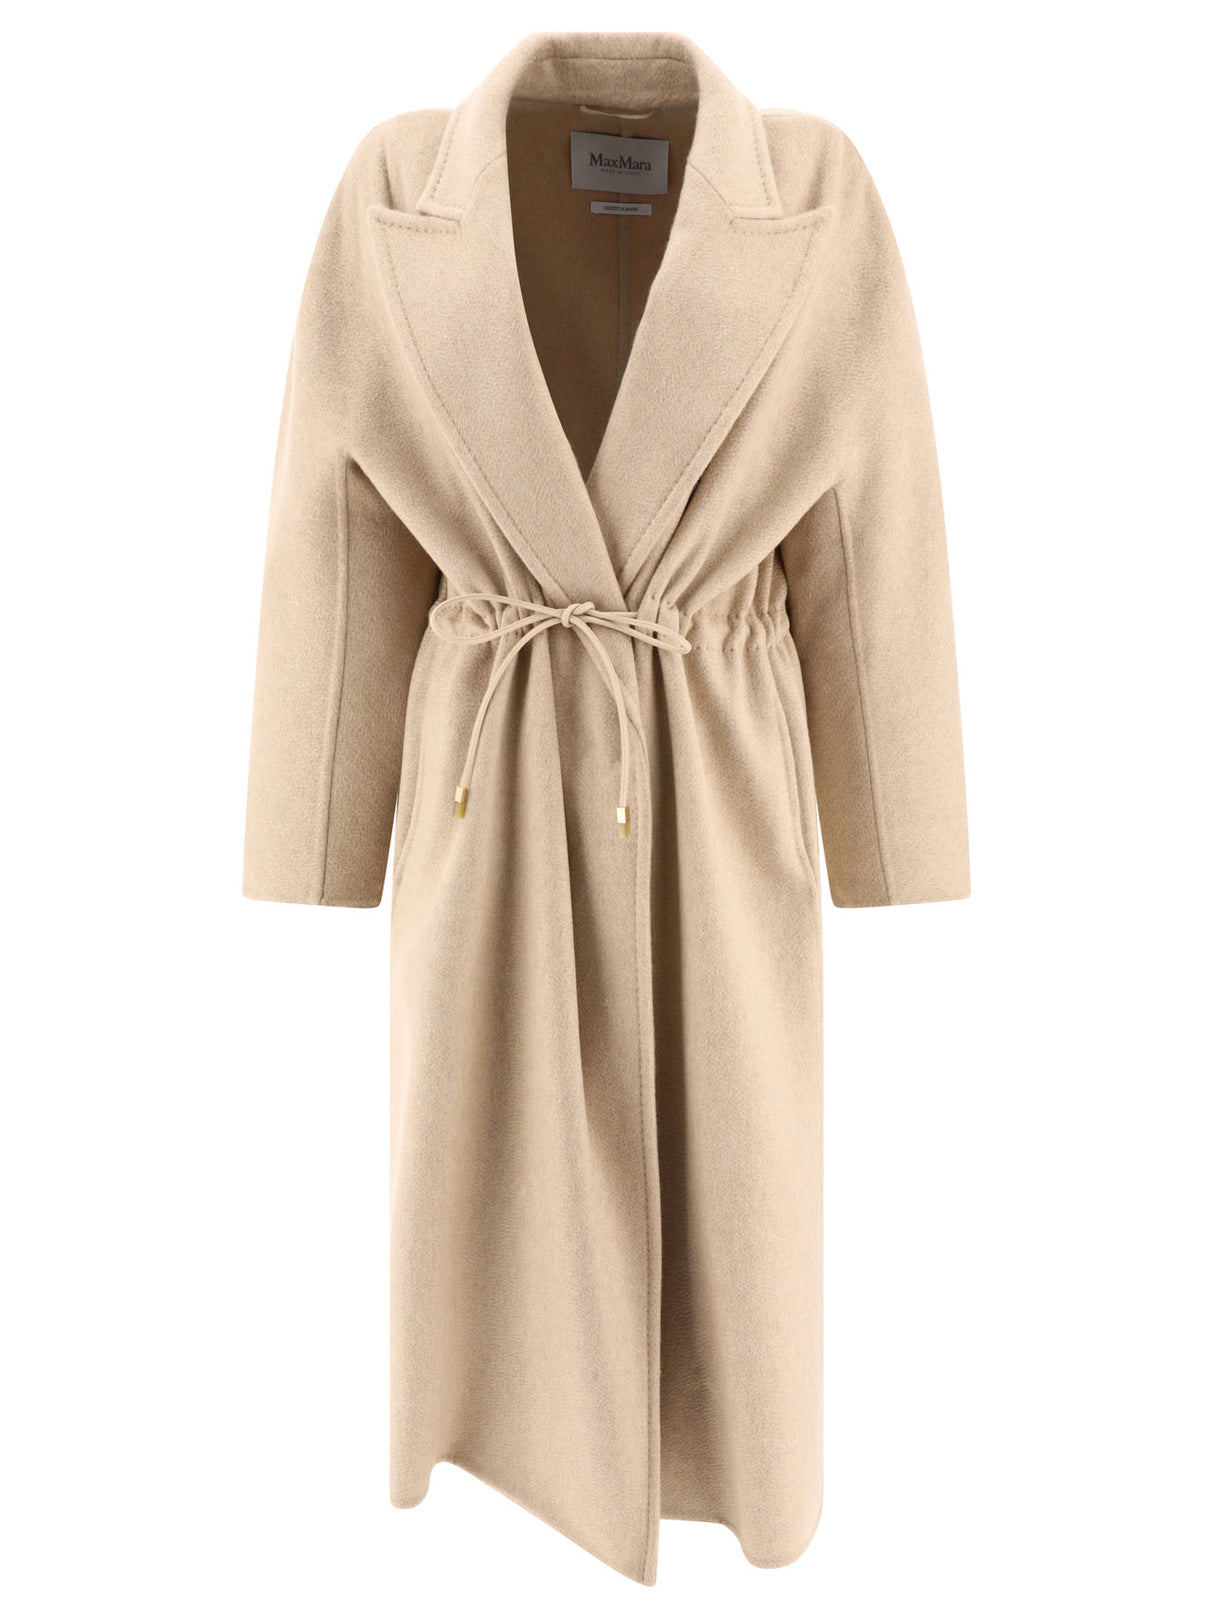 MAX MARA Tan Oversized Cashmere Jacket for Women - SS24 Collection